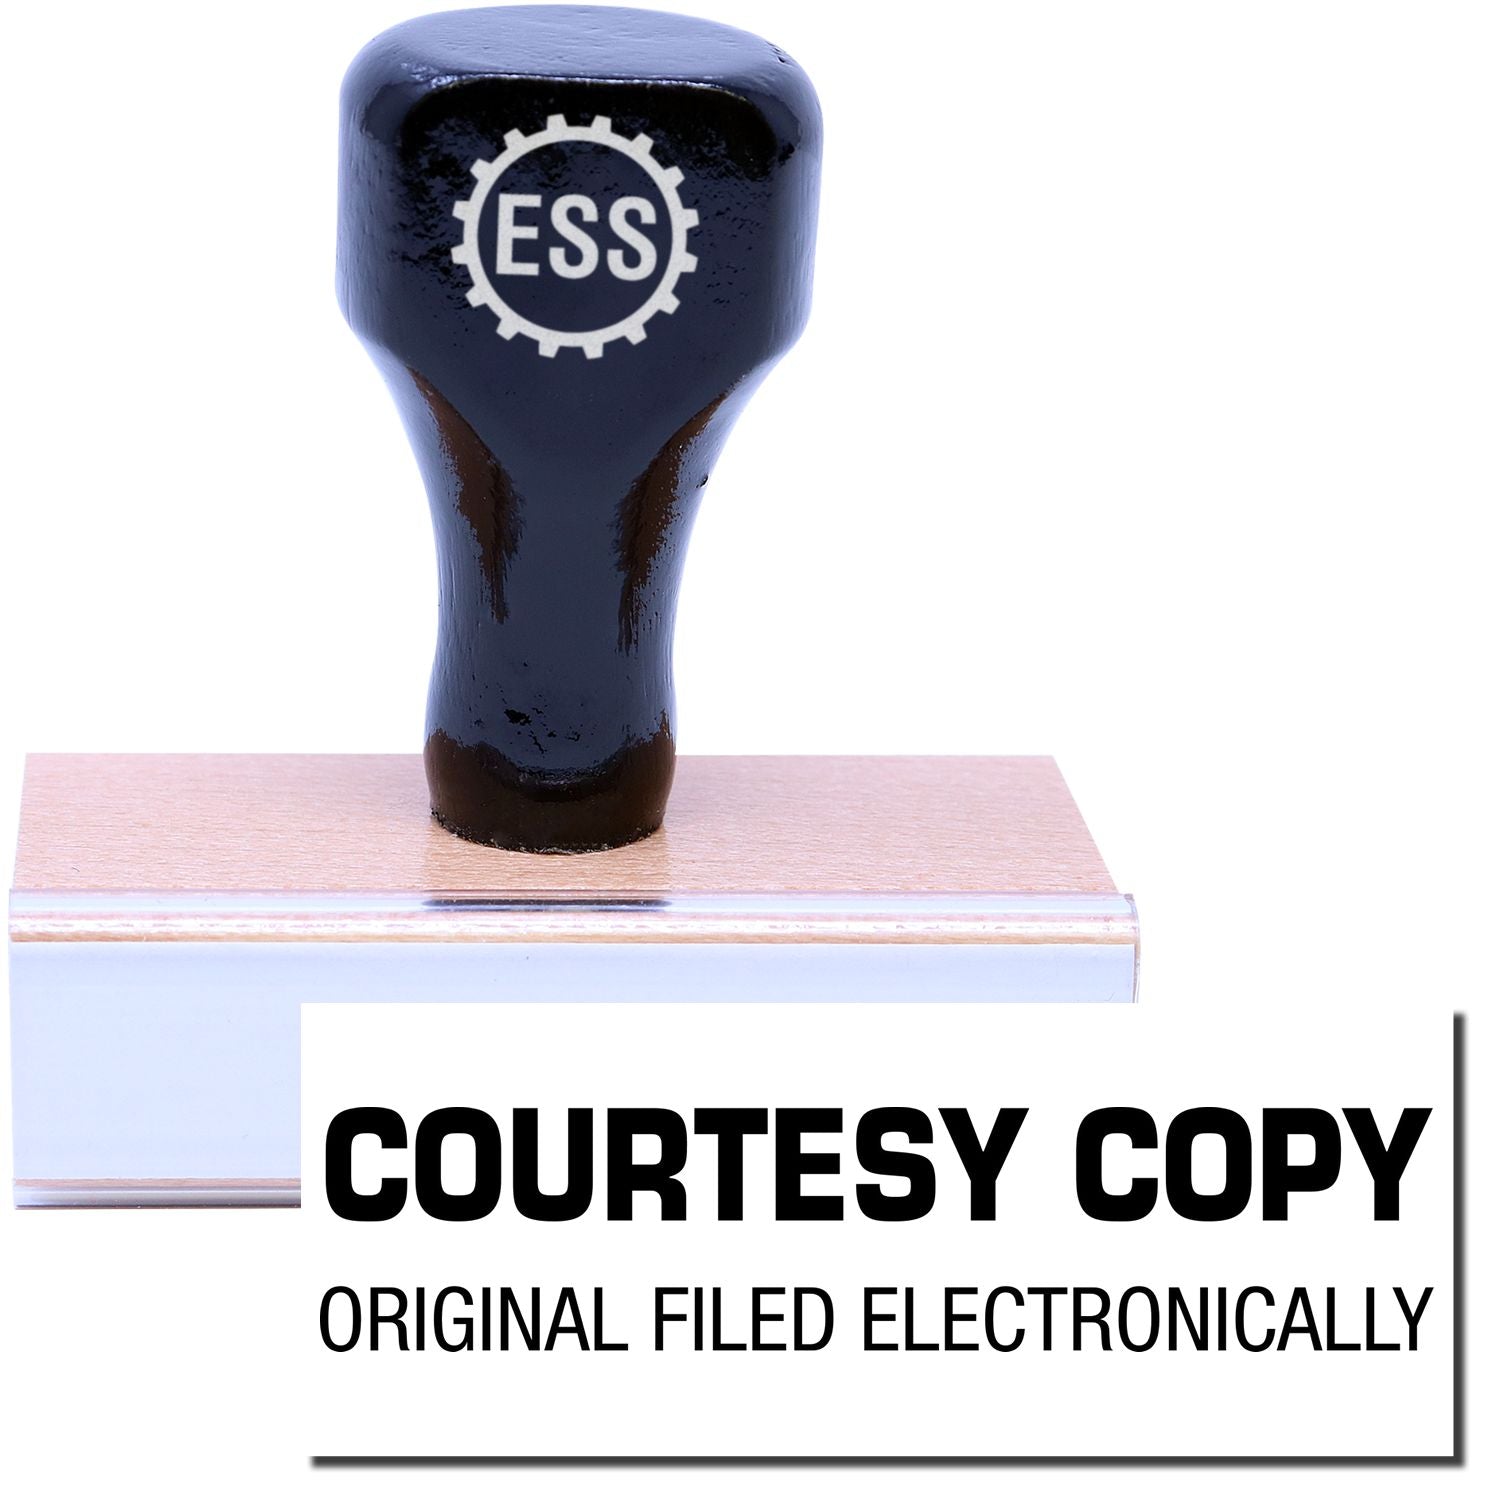 A stock office rubber stamp with a stamped image showing how the text "COURTESY COPY ORIGINAL FILED ELECTRONICALLY" is displayed after stamping.